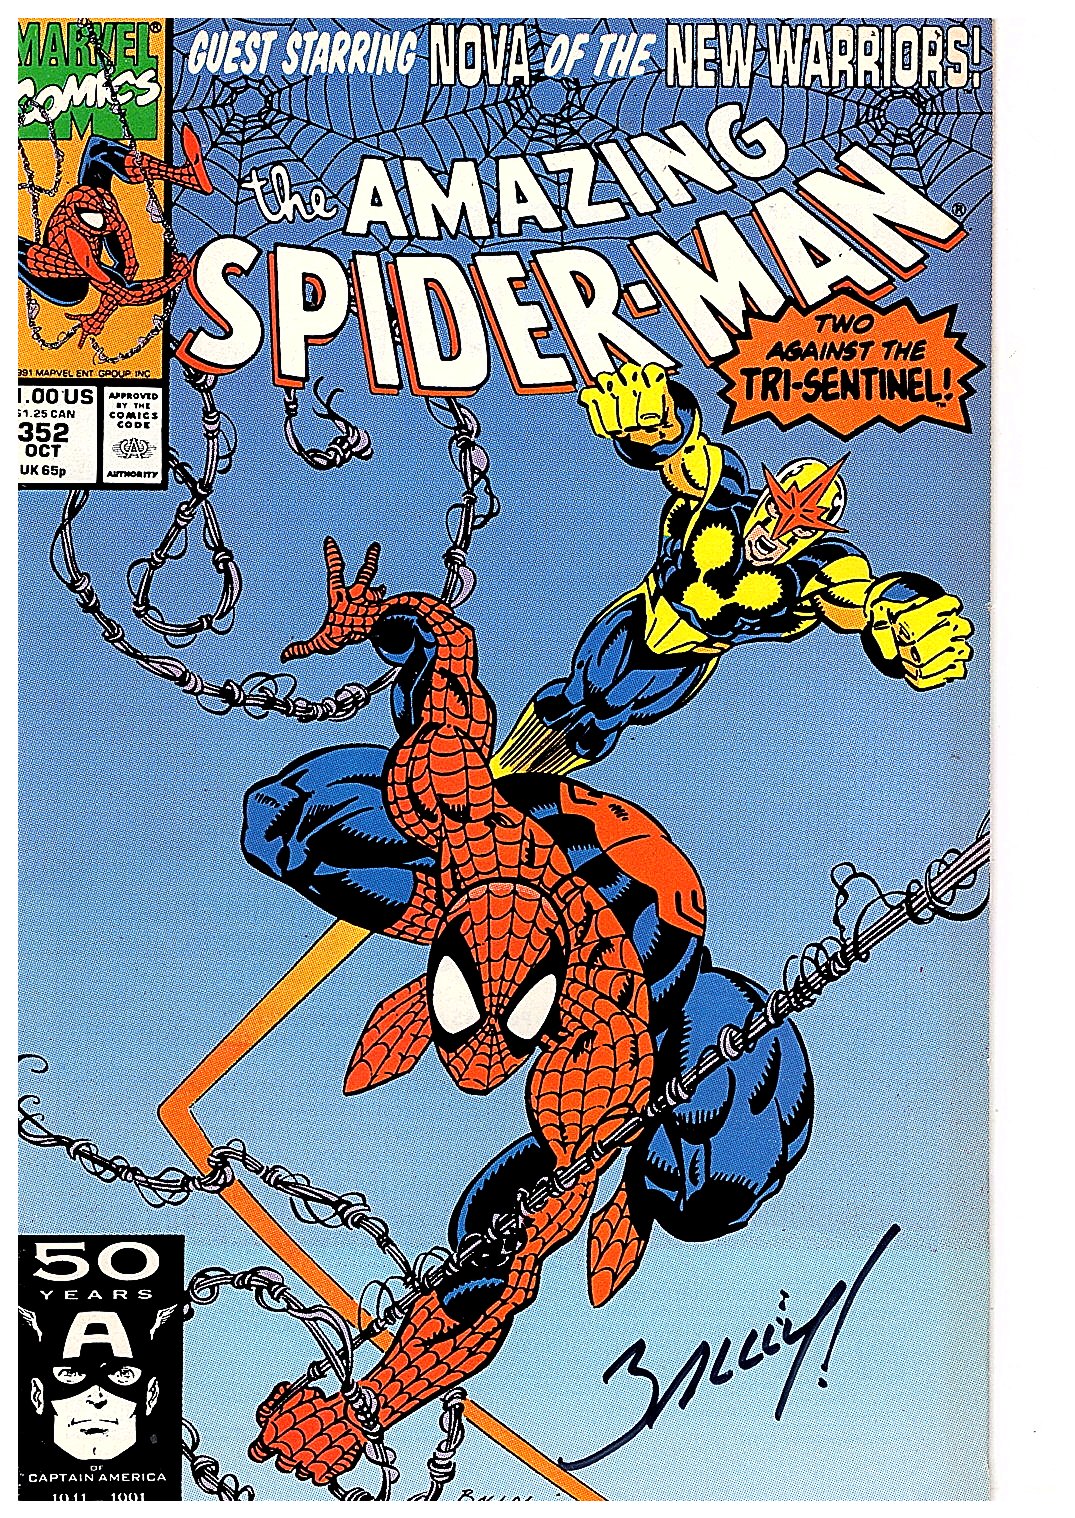 [Signed] The Amazing Spider-Man #352